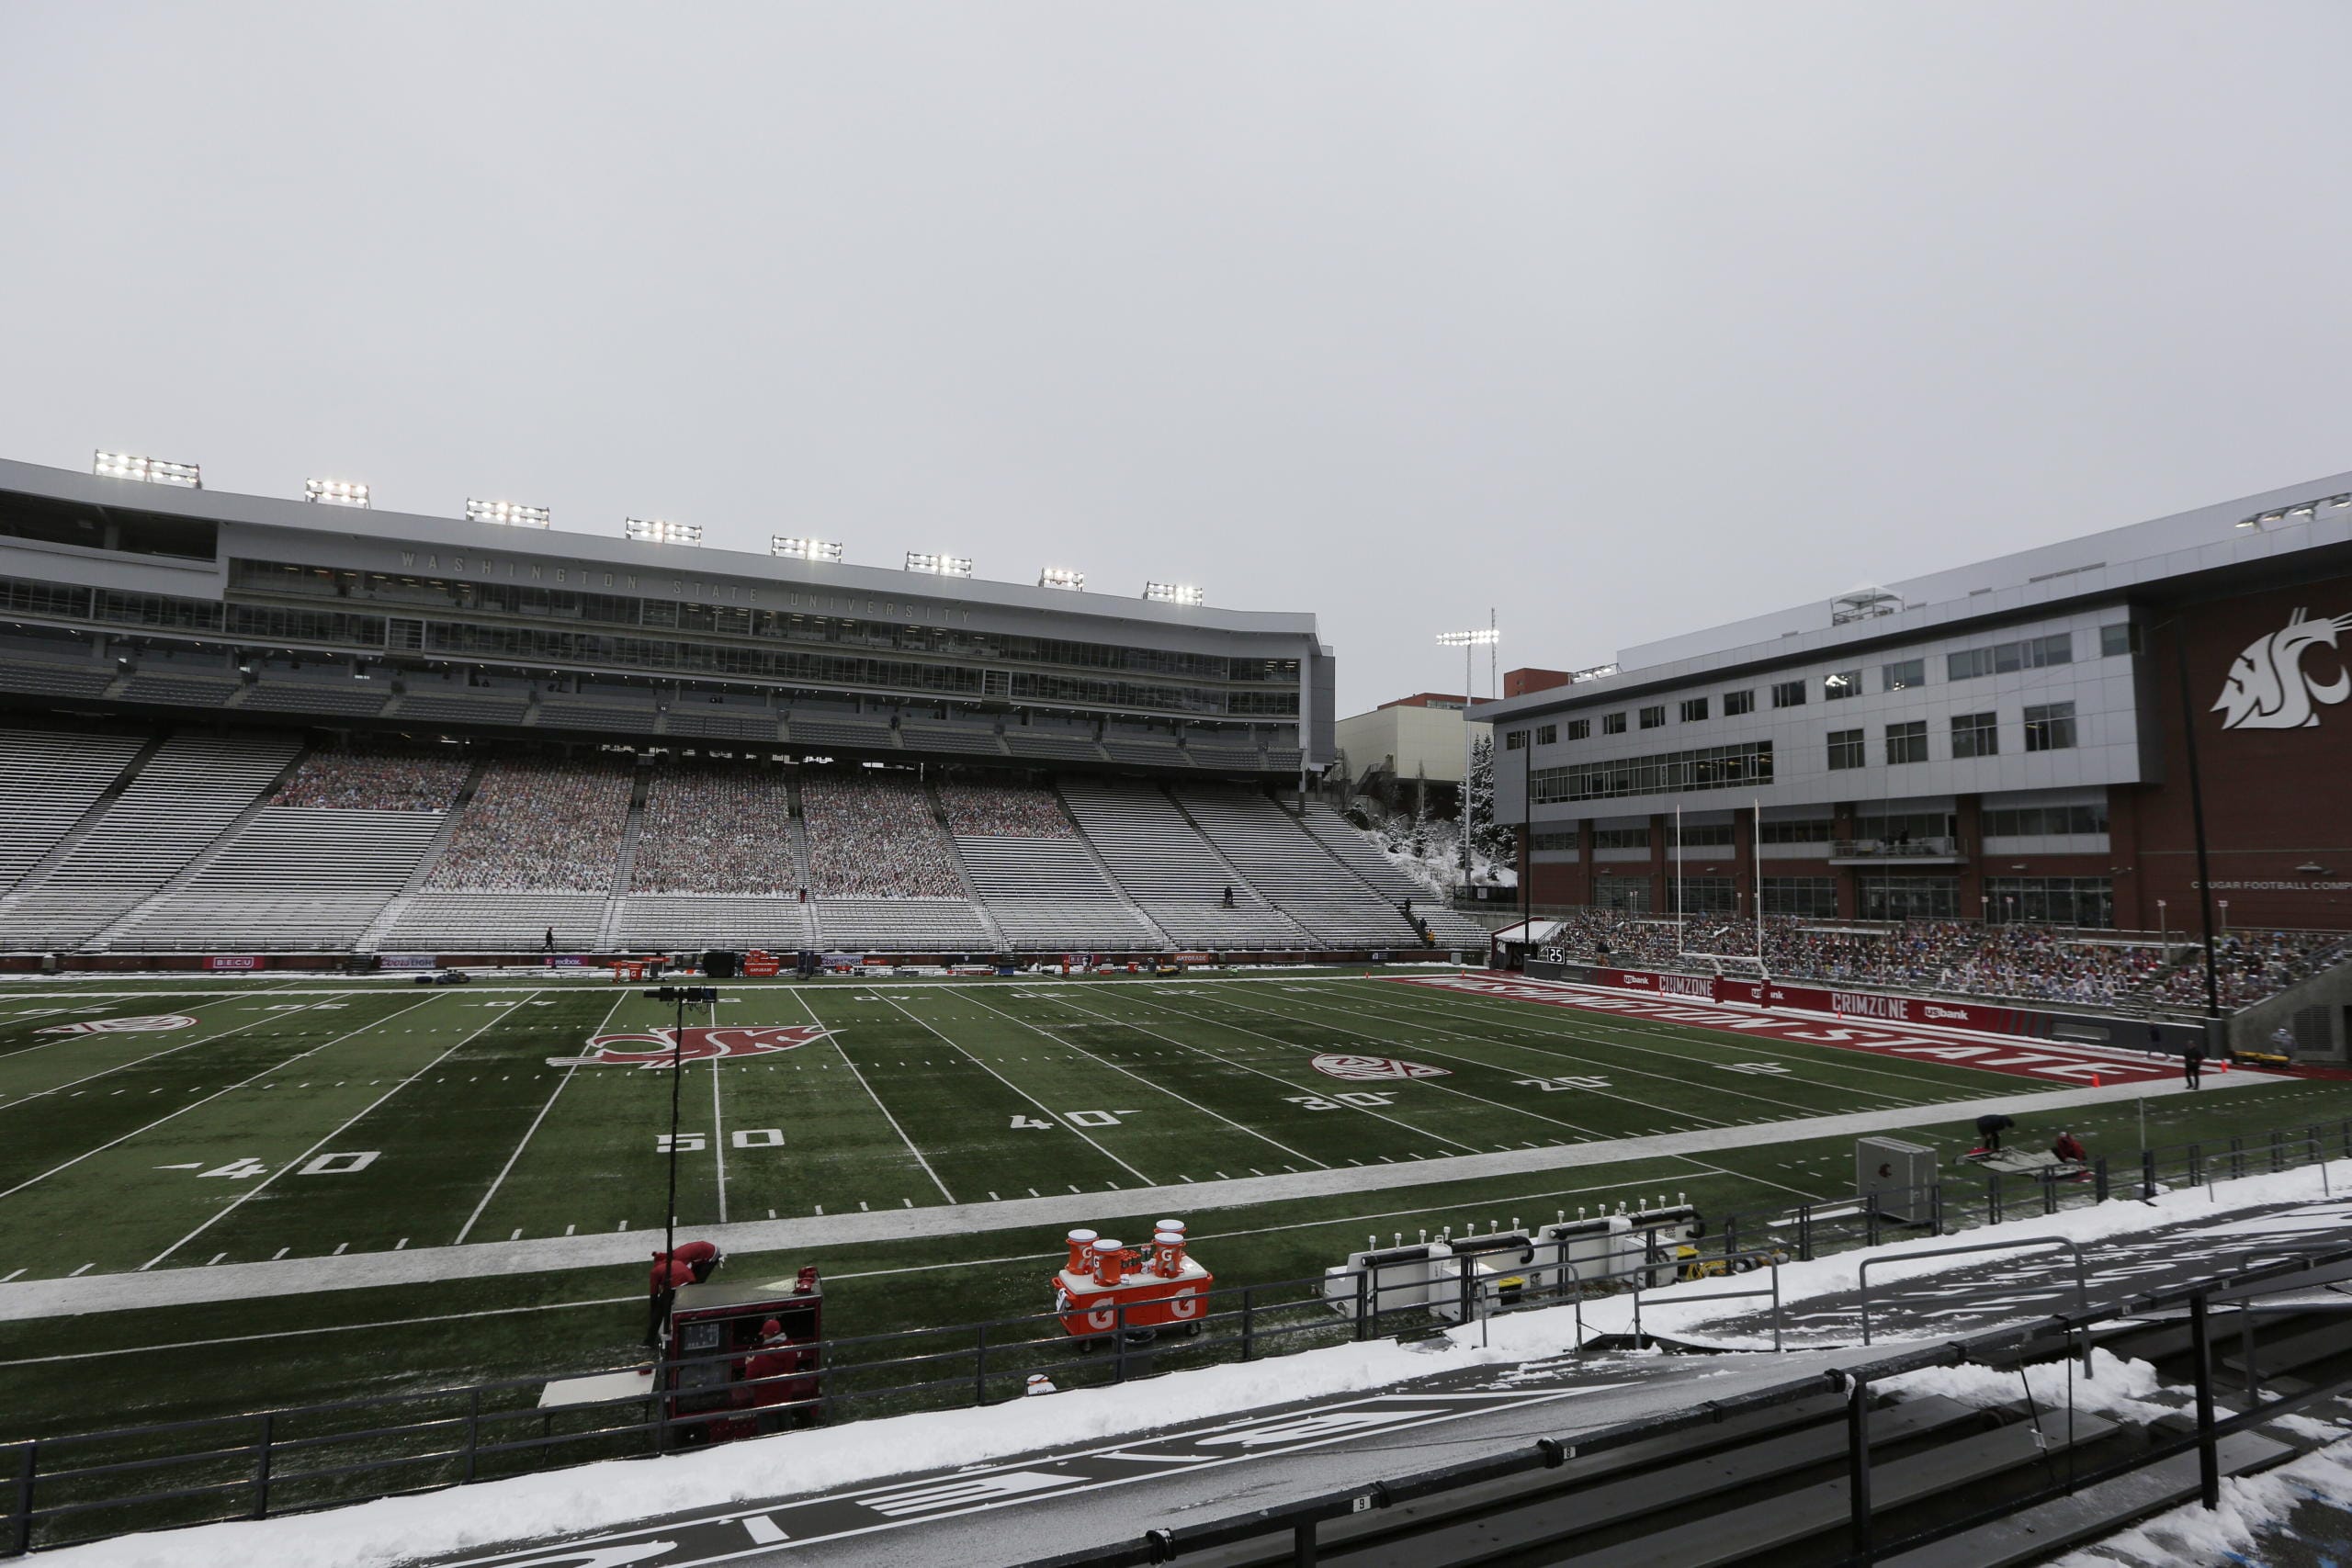 Martin Stadium is seen after the NCAA college football game between Washington State and California was canceled due to COVID-19 positive testing and contact tracing on the California team,  Saturday, Dec. 12, 2020, Pullman, Wash.